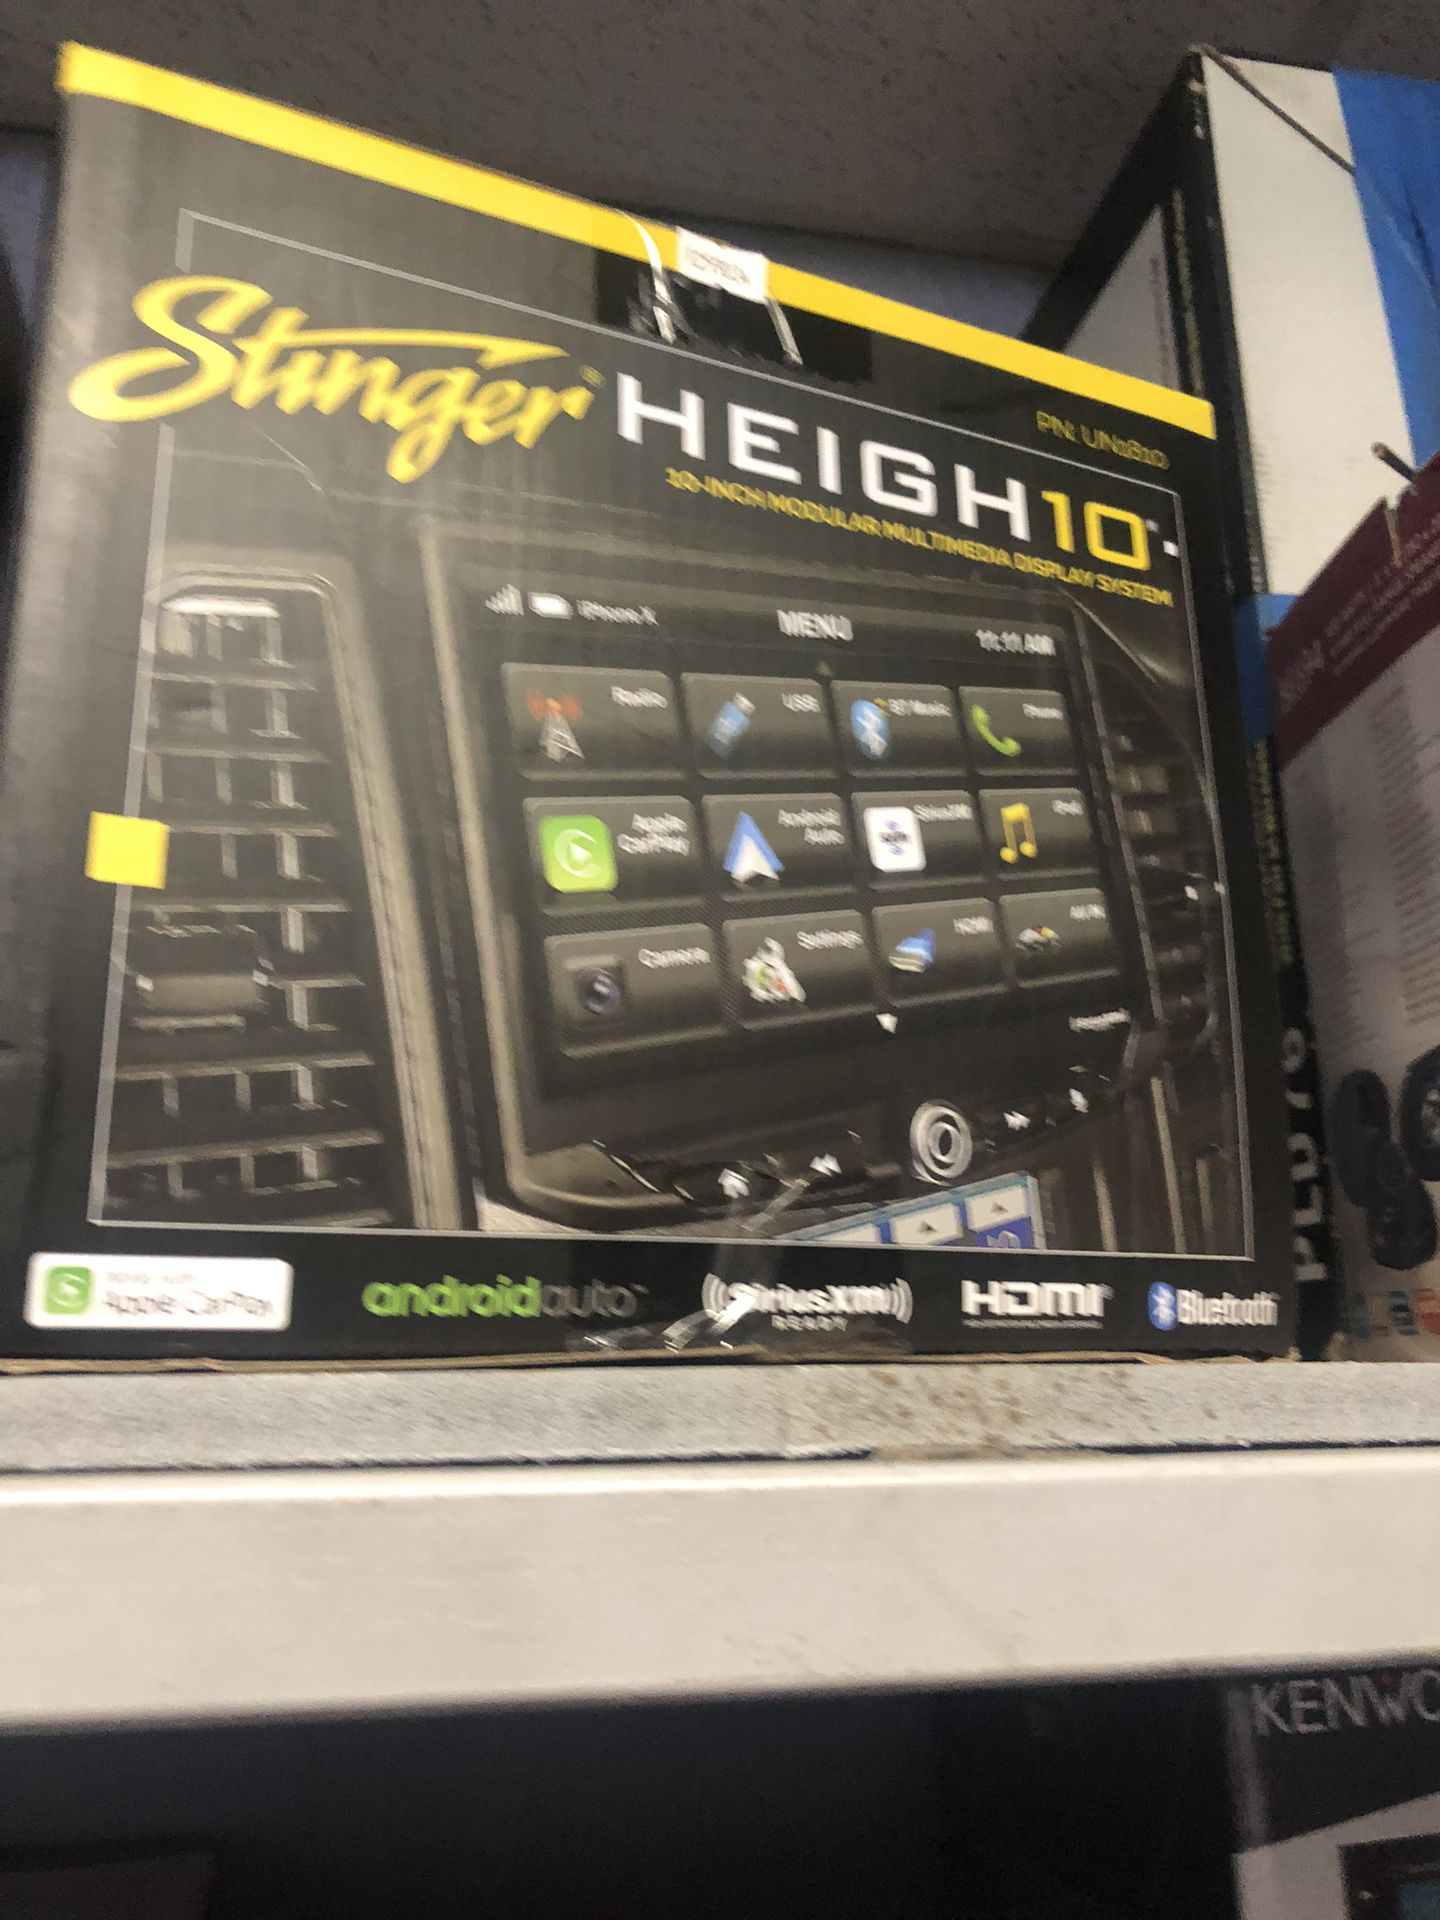 Stinger Heigh10 Stereo On Sale For 799.99